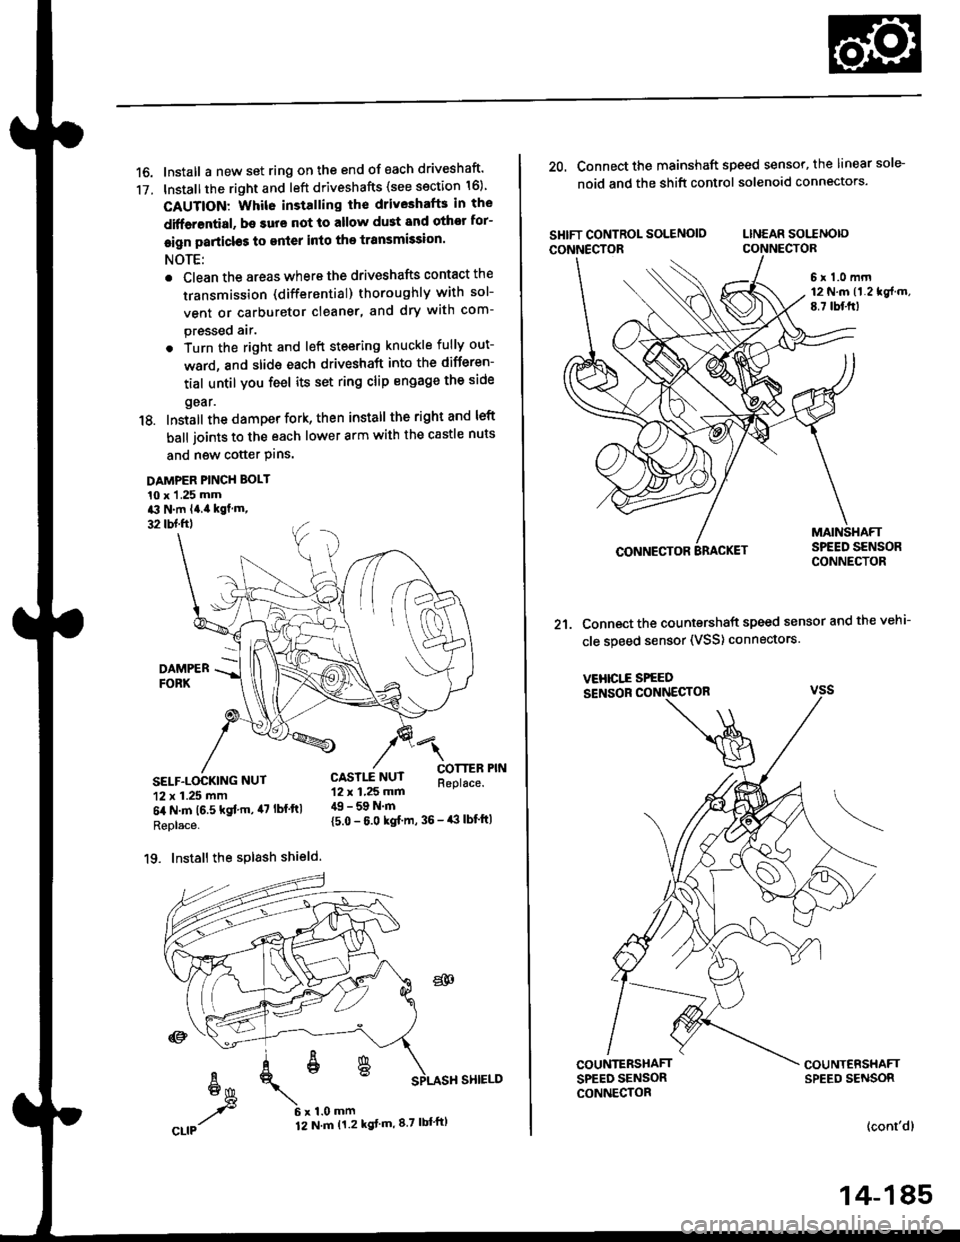 HONDA CIVIC 1999 6.G Workshop Manual 16. Install a new set ring on the end of each driveshaft
17. Installthe right and left driveshafts (see ssction 16)
CAUTION: Whil6 installing the driveshafE in the
diffarential, be surs not lo allow 